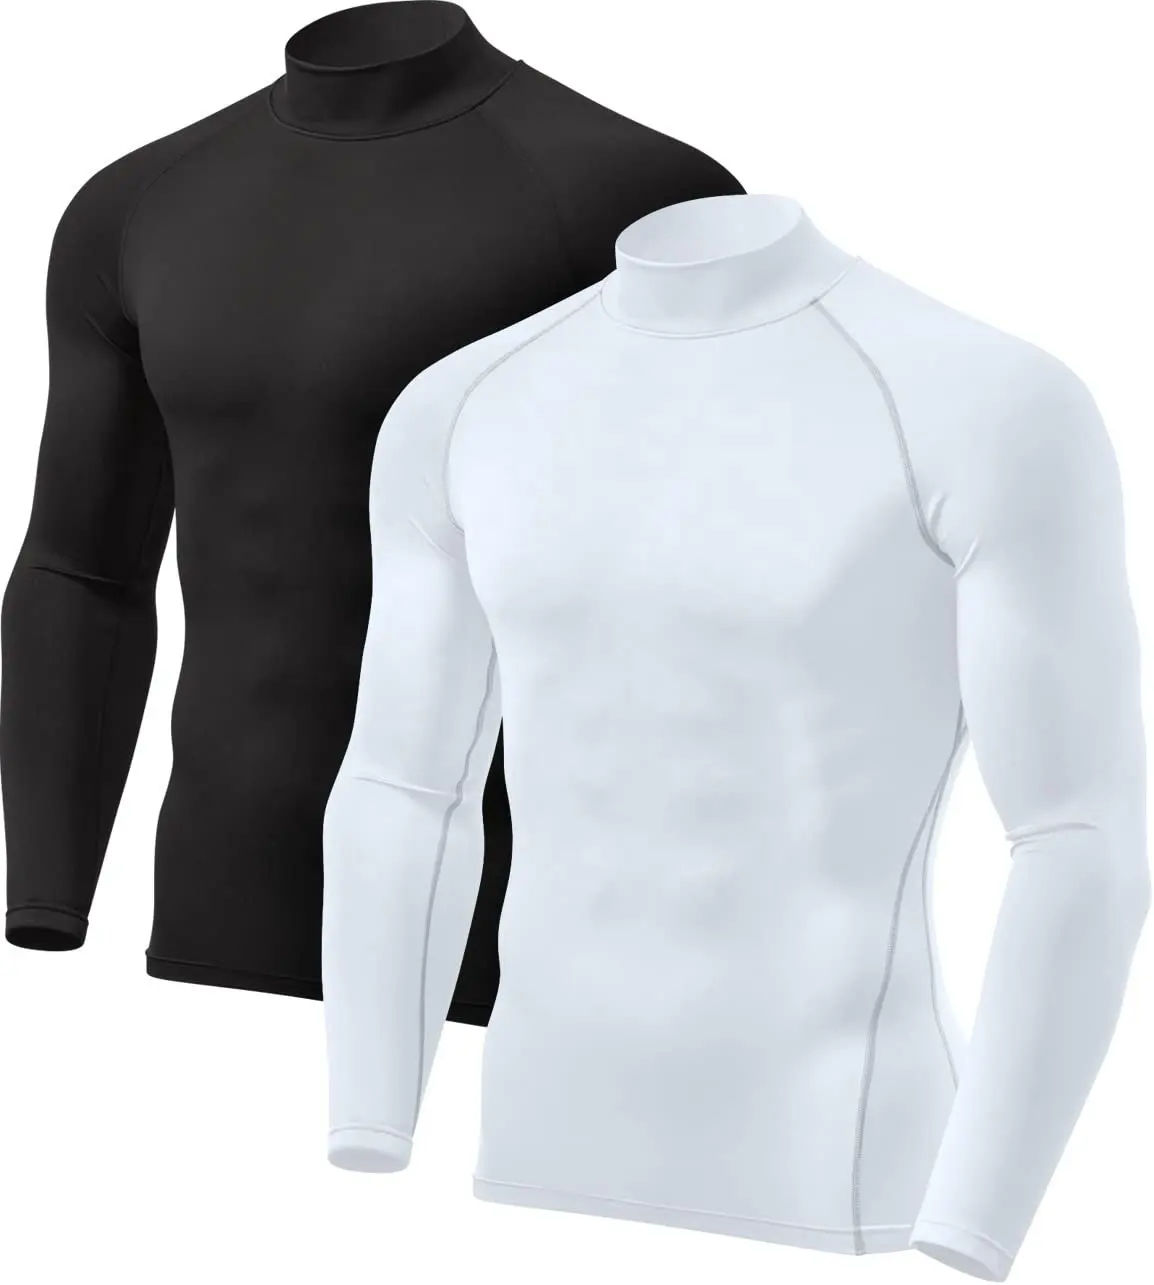 Custom Men's Thermal Long Sleeve Compression Shirts Mock Turtleneck Winter Sports Running cycling Base Layer Top